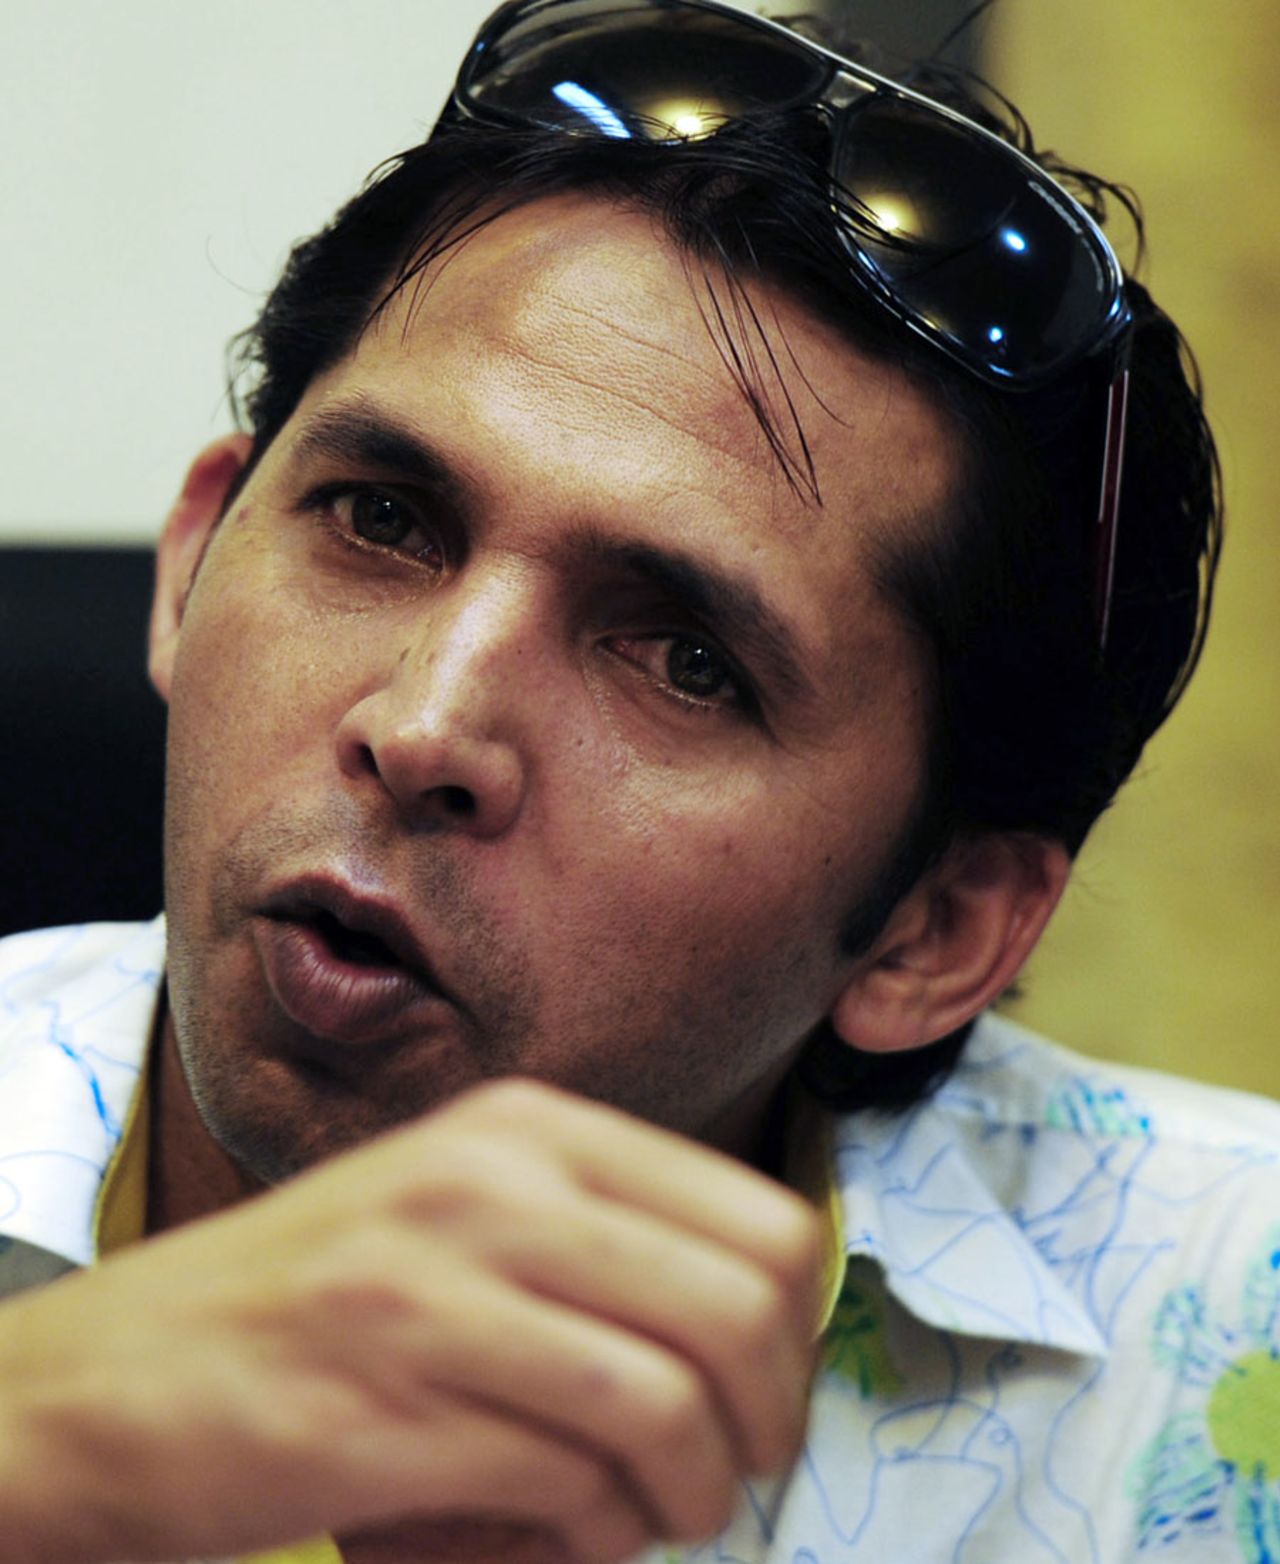 Mohammad Asif apologised to his fans for his role in spot-fixing in 2010, Karachi, August 14, 2013